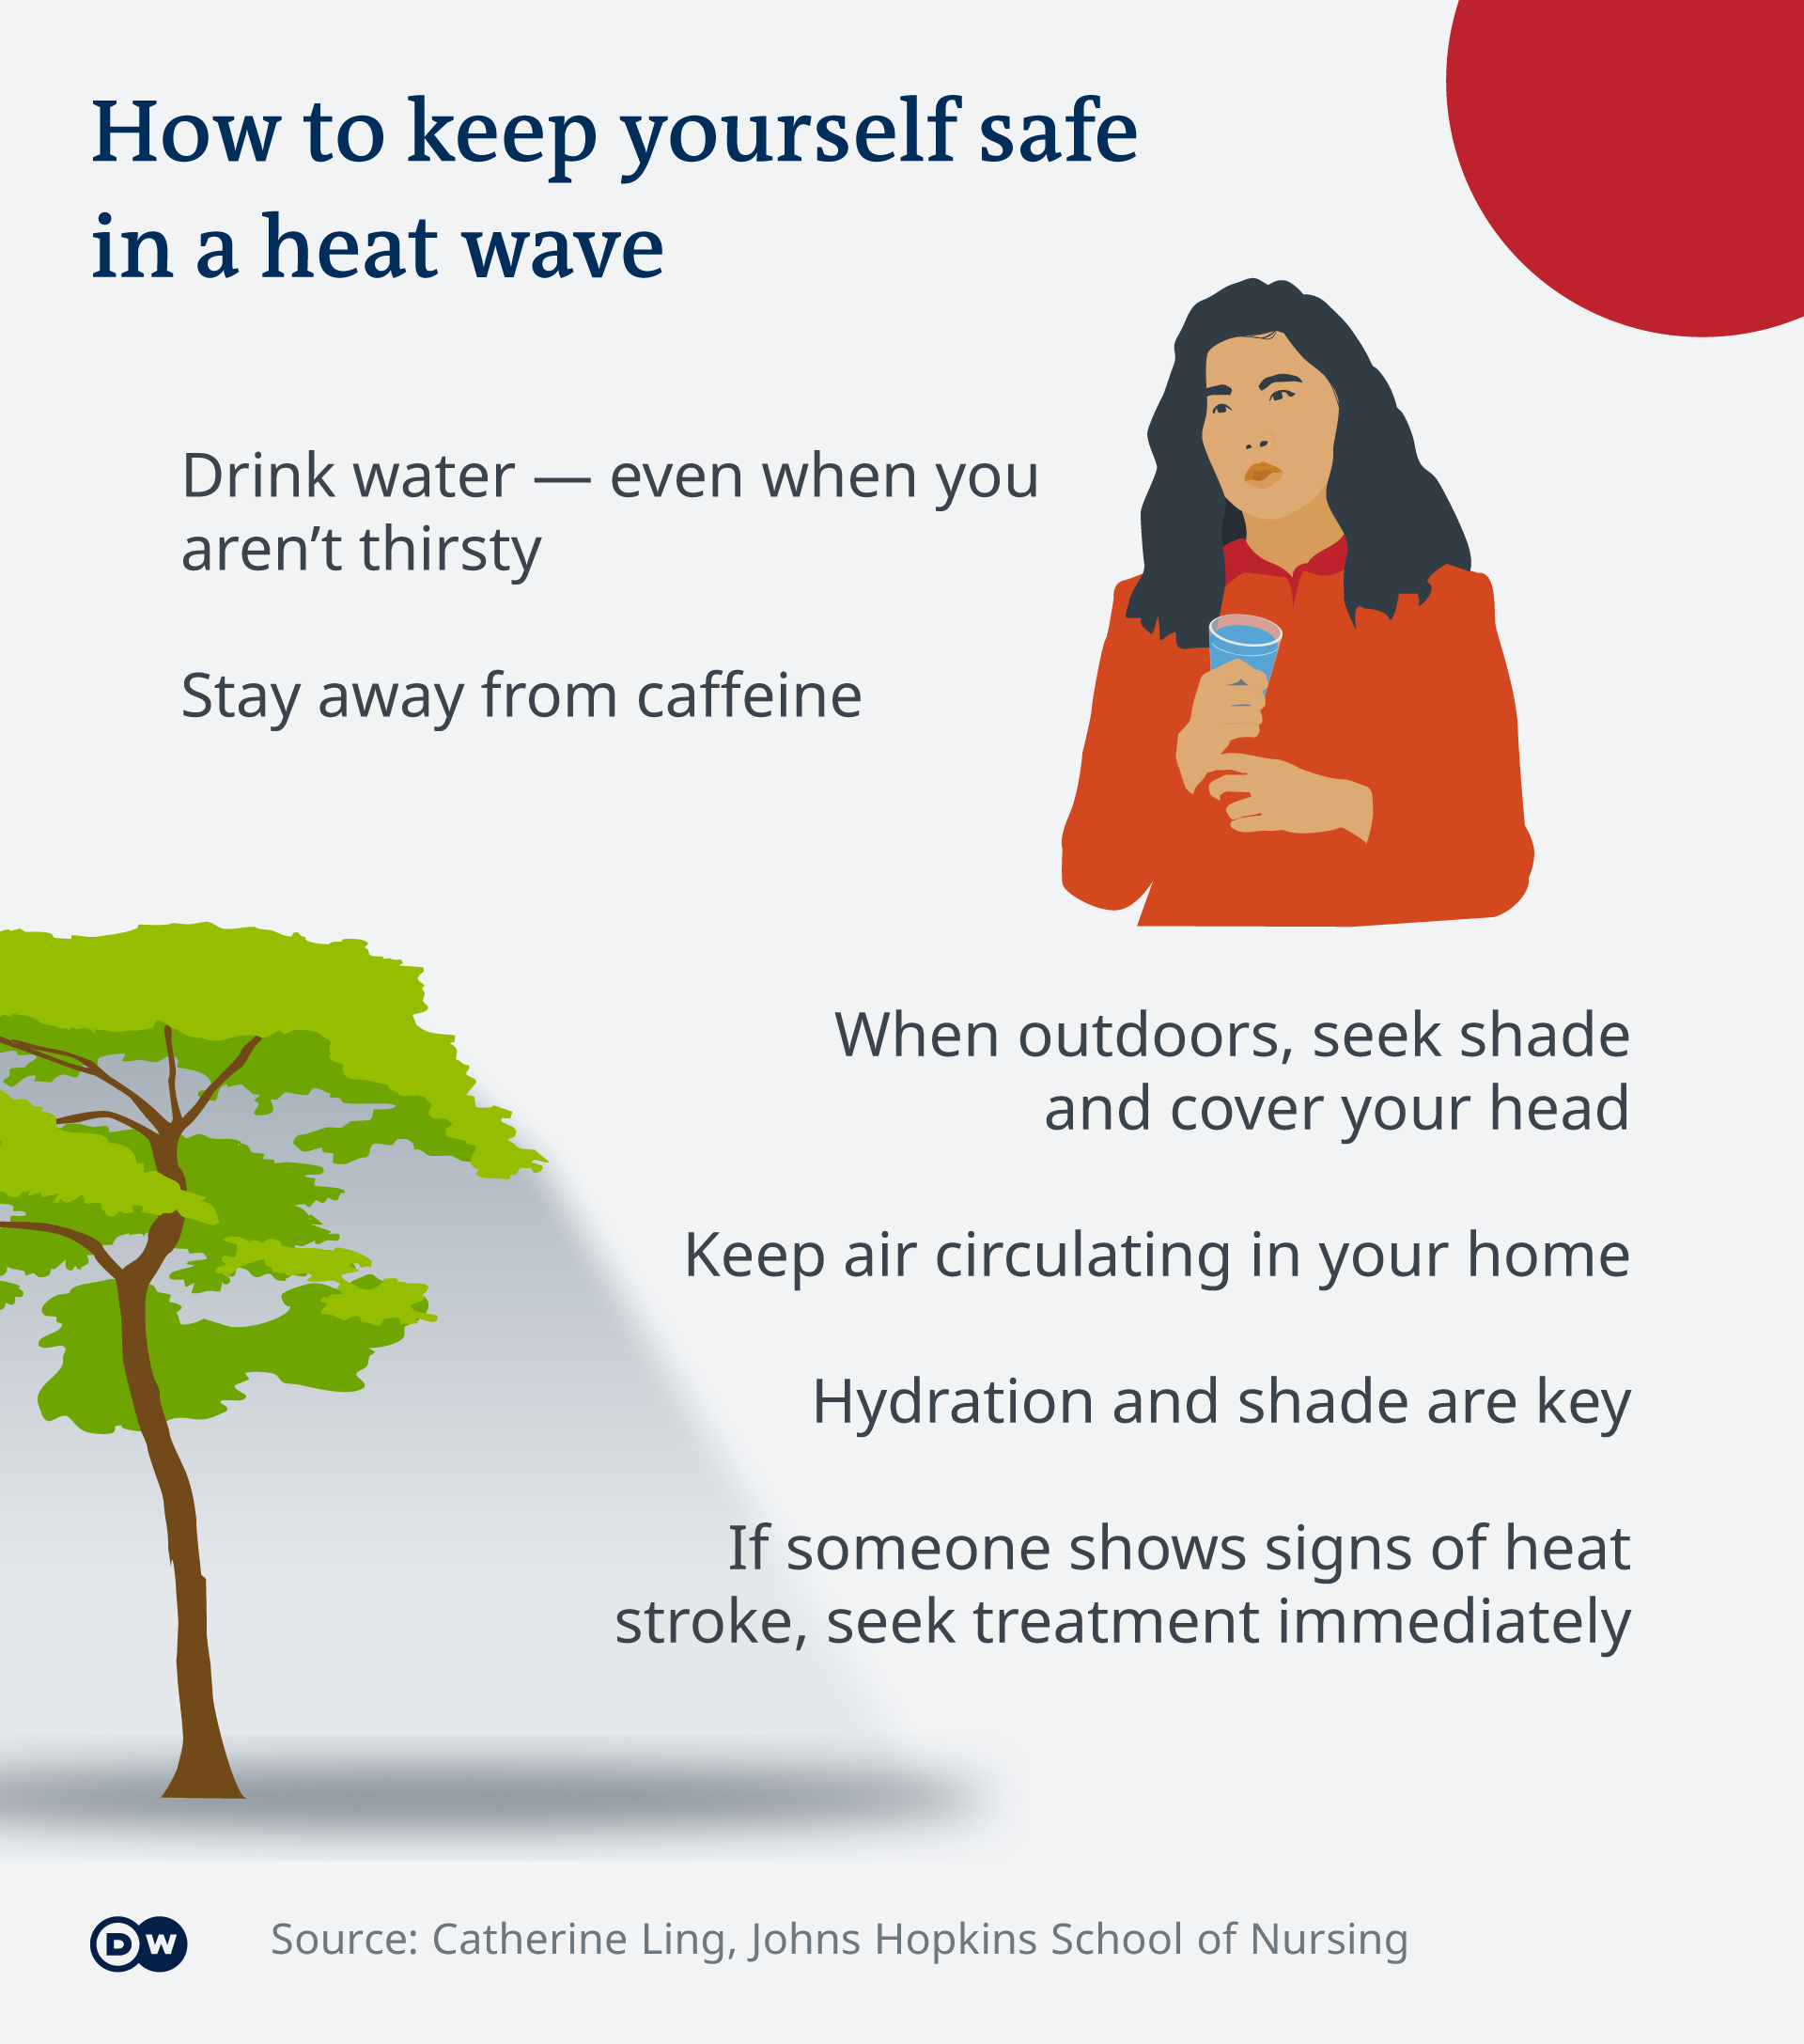 Infographic on how to protect yourself and stay safe and hydrated in a heat wave